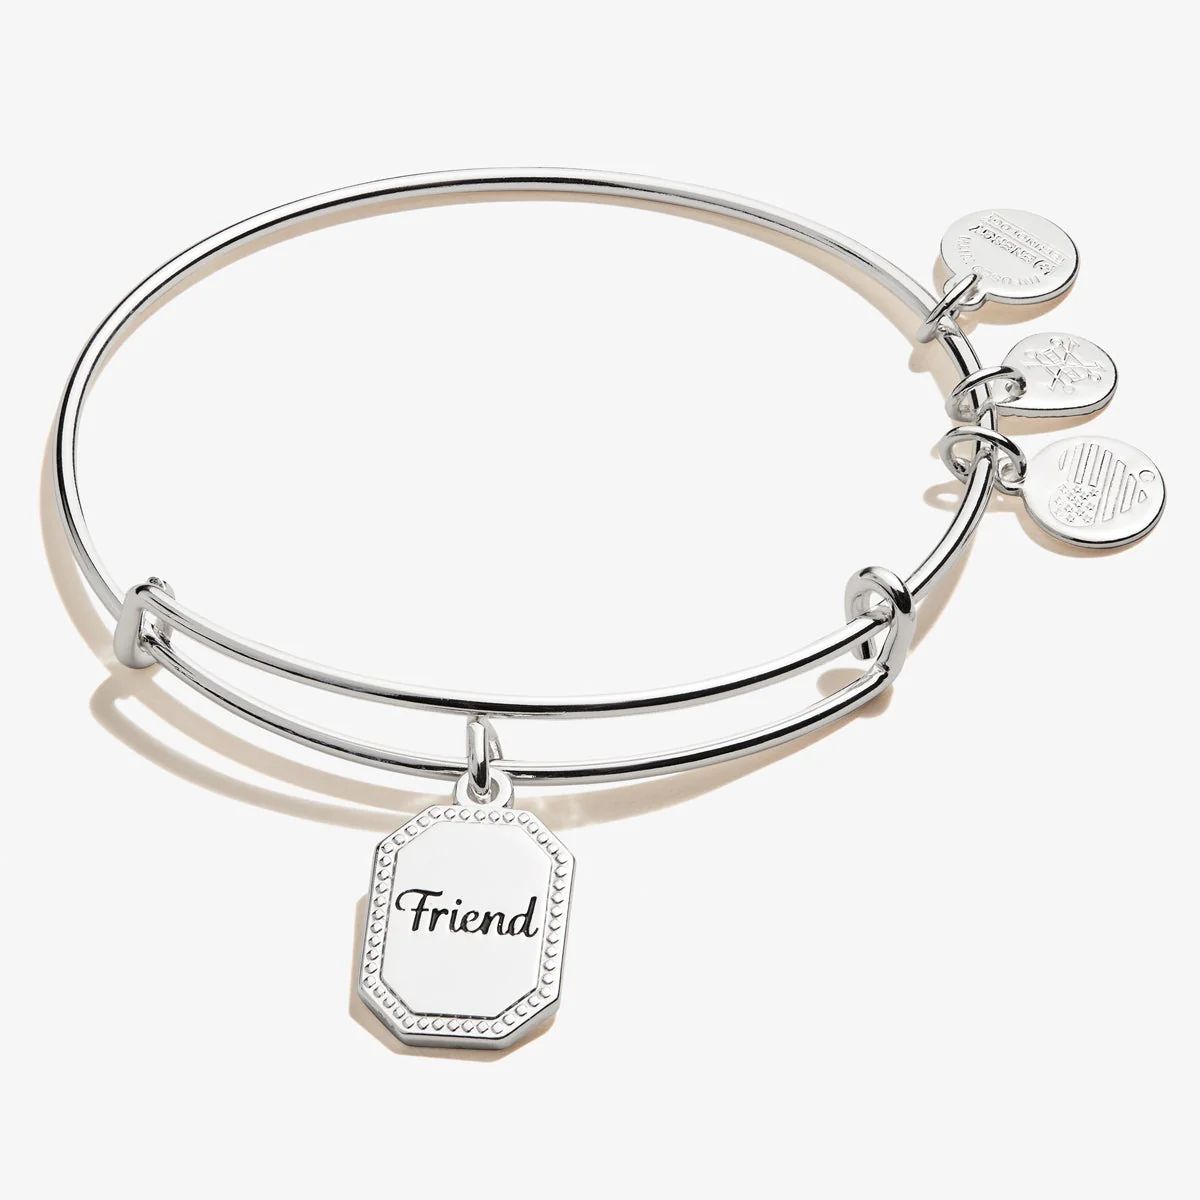 United by Soul, Let the Good Times Roll' Charm Bangle | Alex and Ani